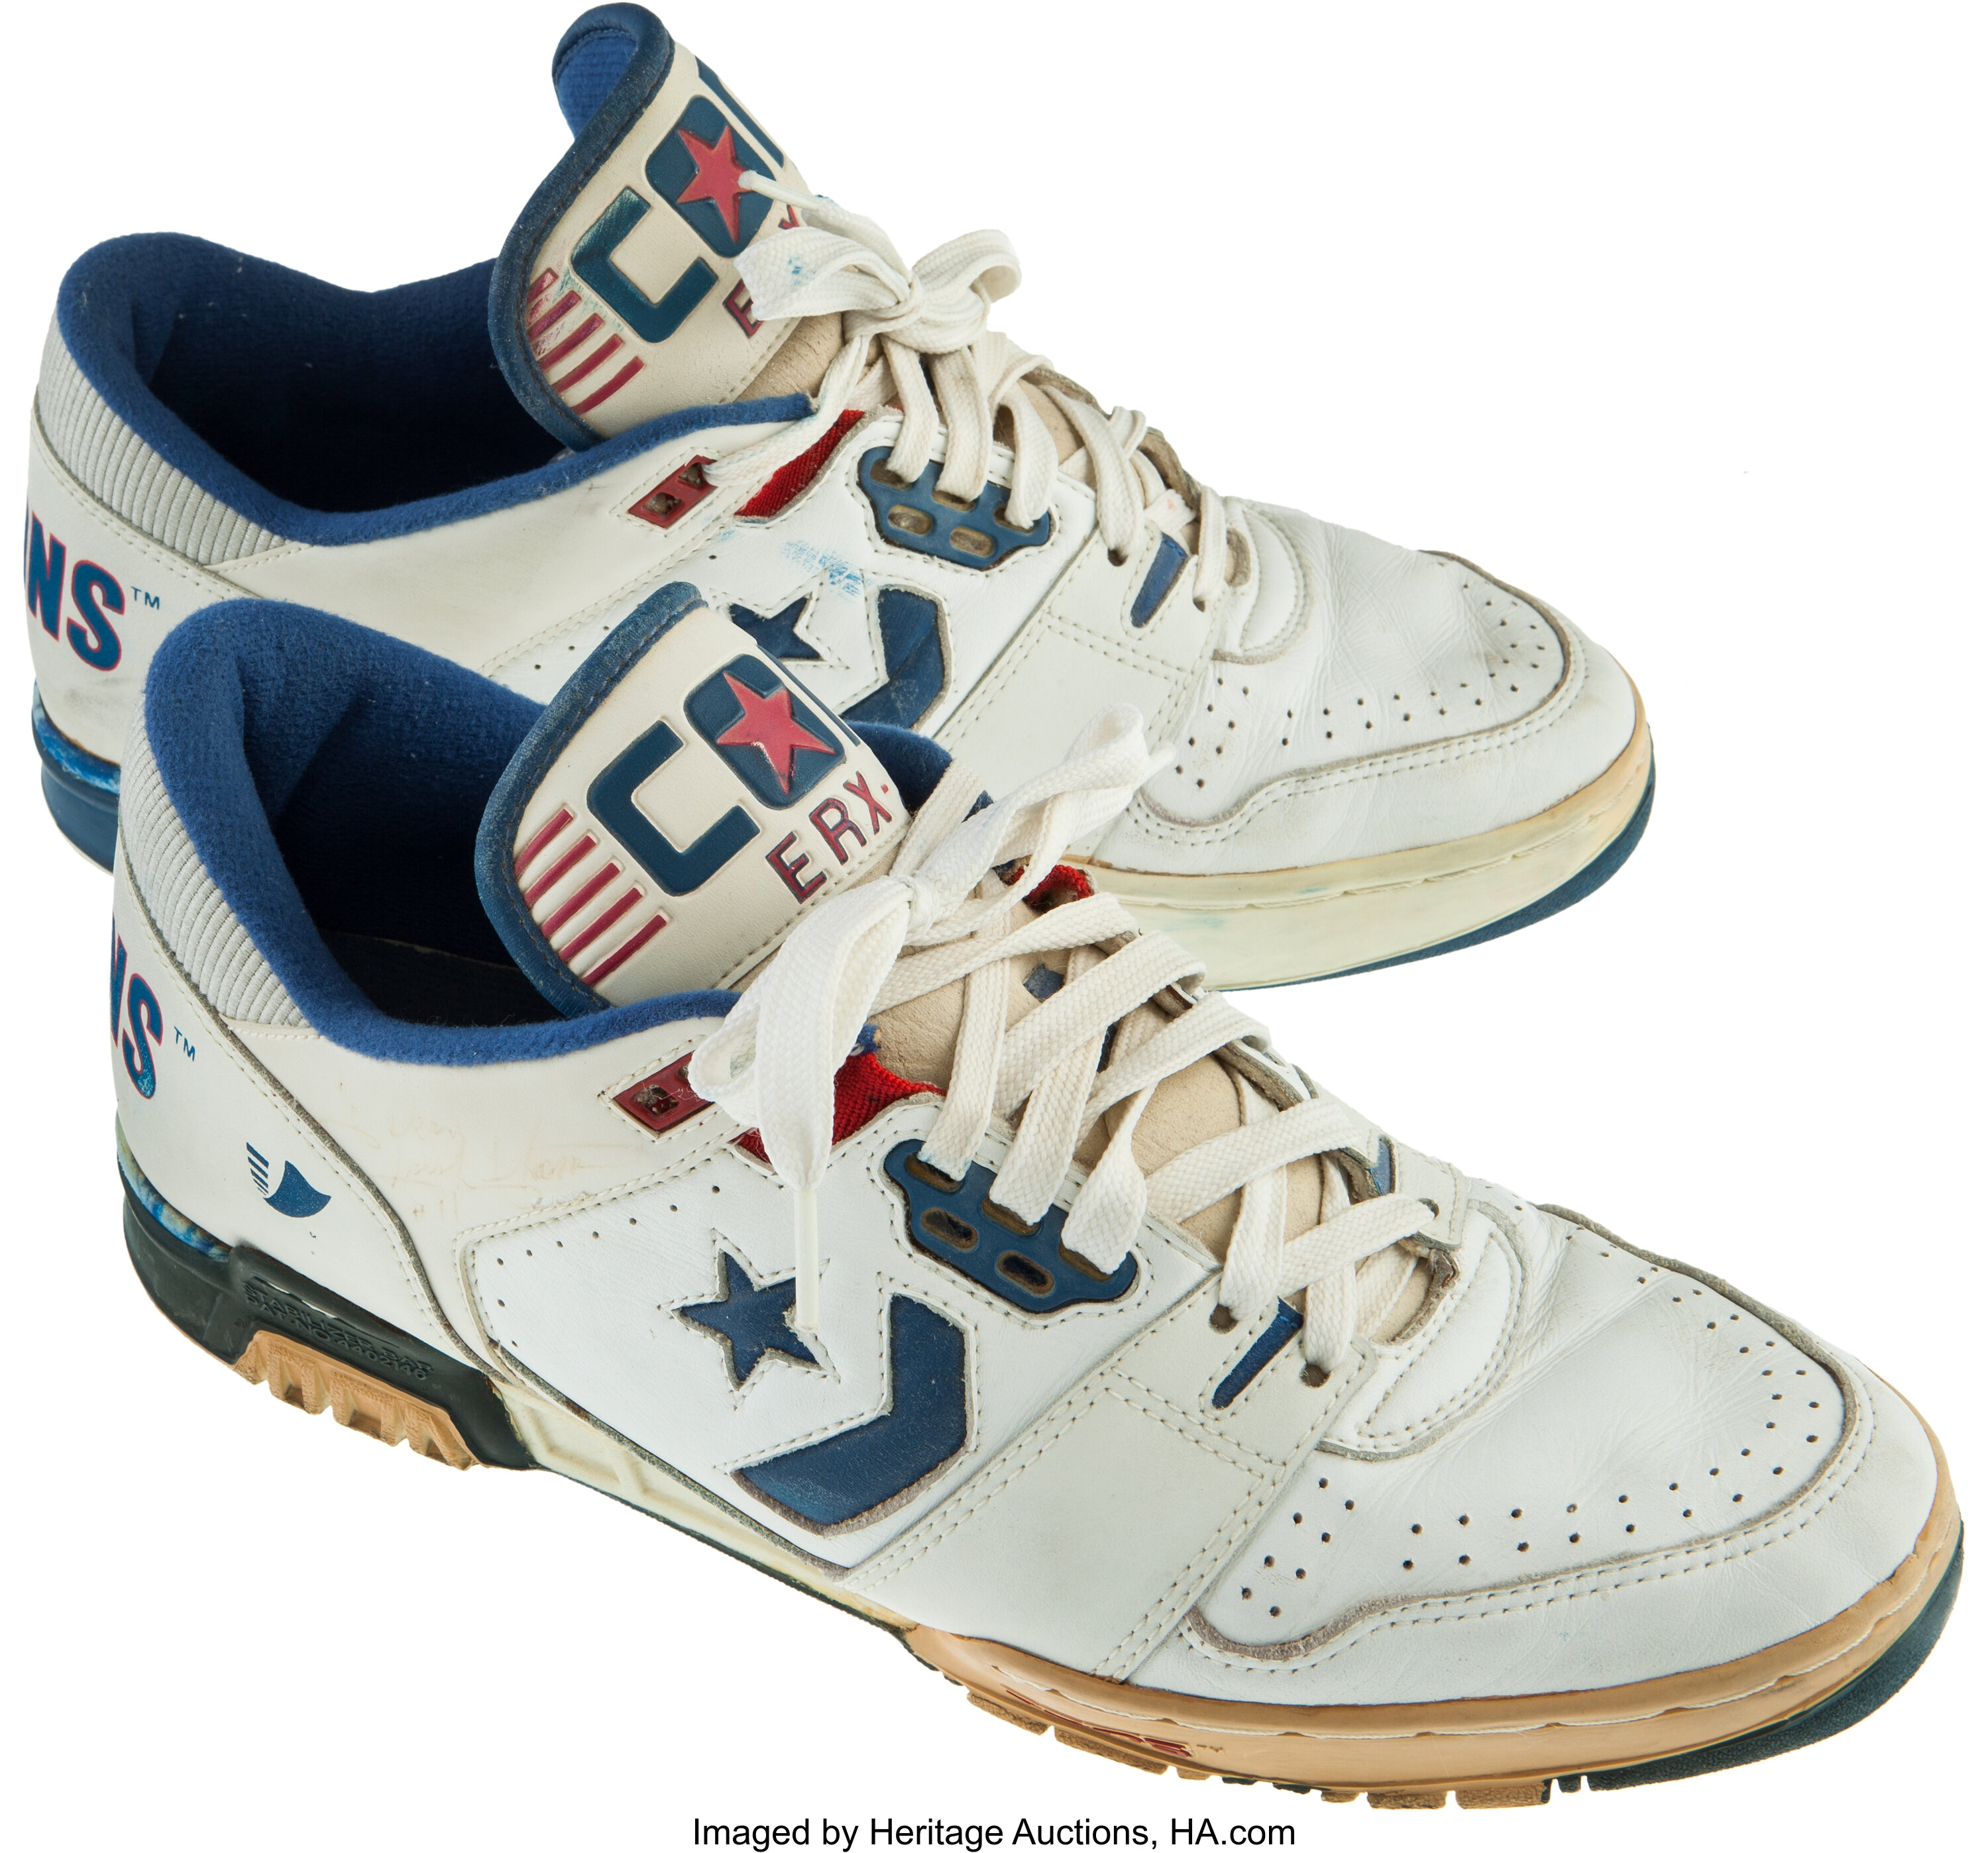 1980's Isiah Thomas Game Worn Shoes - From Family of Sandy | Lot #80287 |  Heritage Auctions